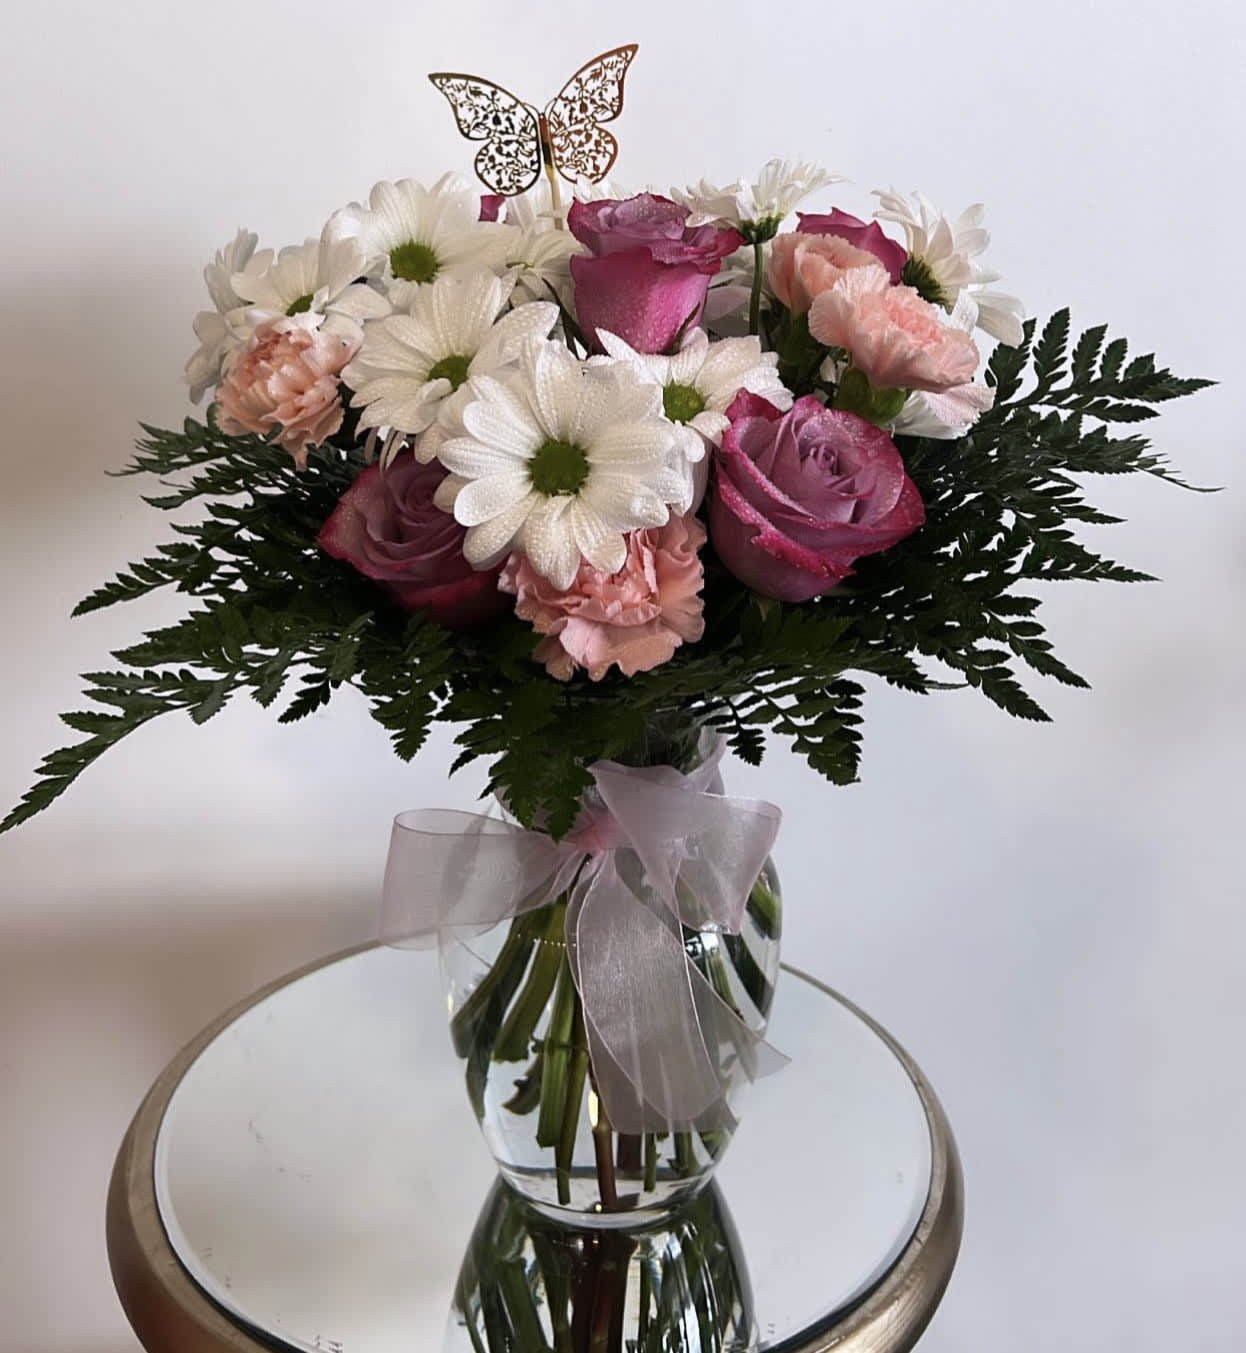 Delight Vase Special - Flowers may have to be substituted.. But you should recieve the same overall color and theme. 